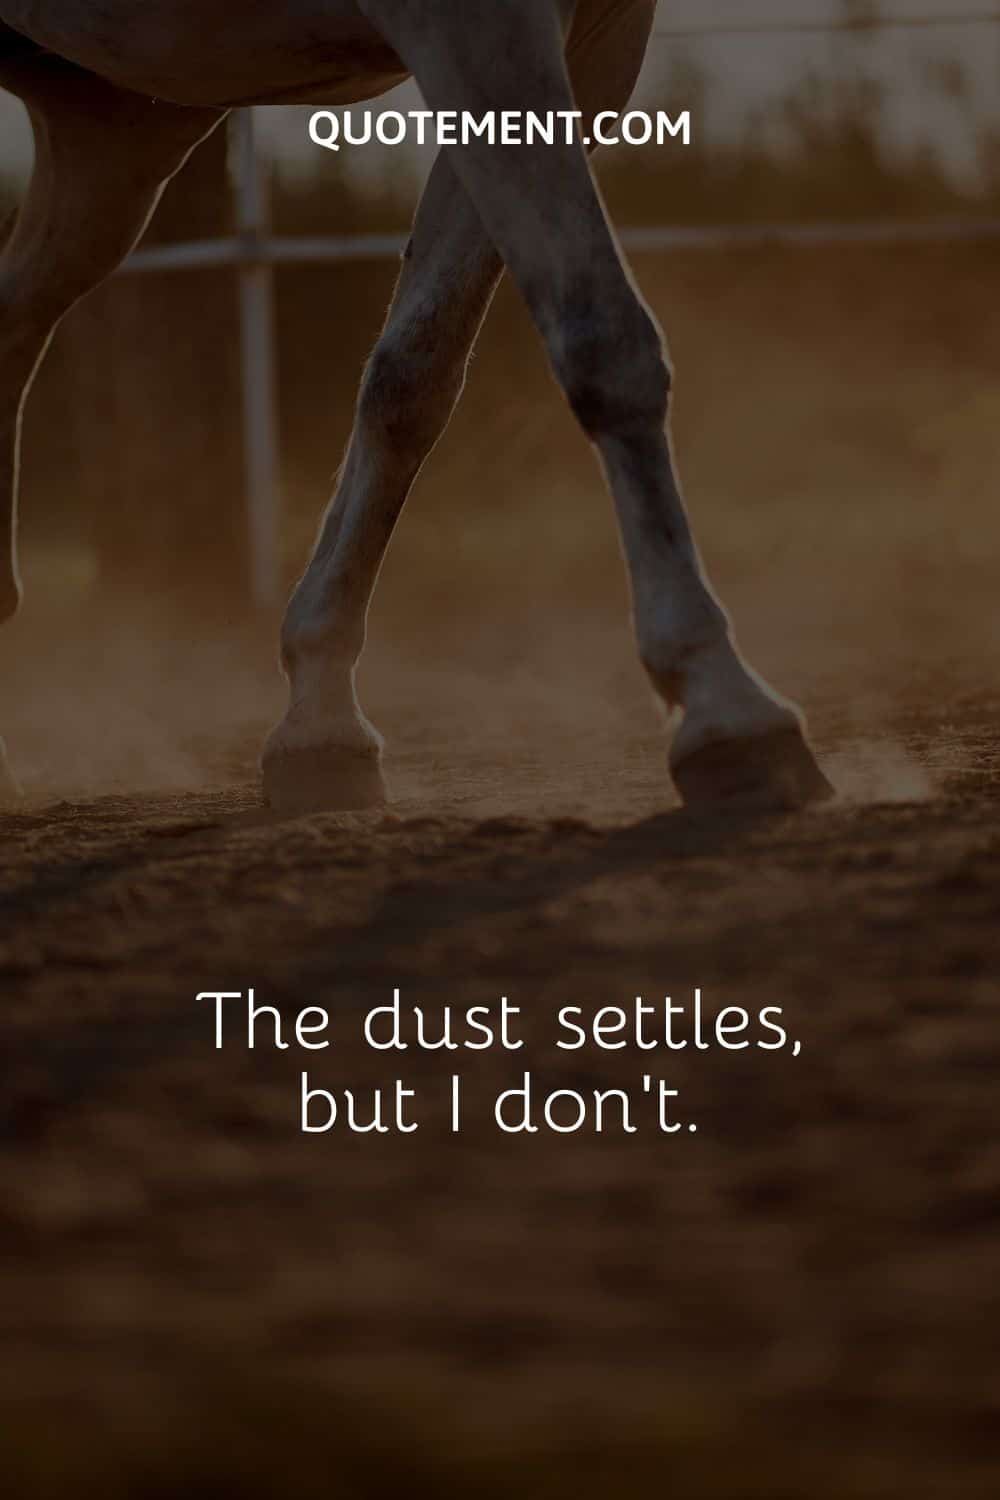 a horse's legs on a dusty ground
